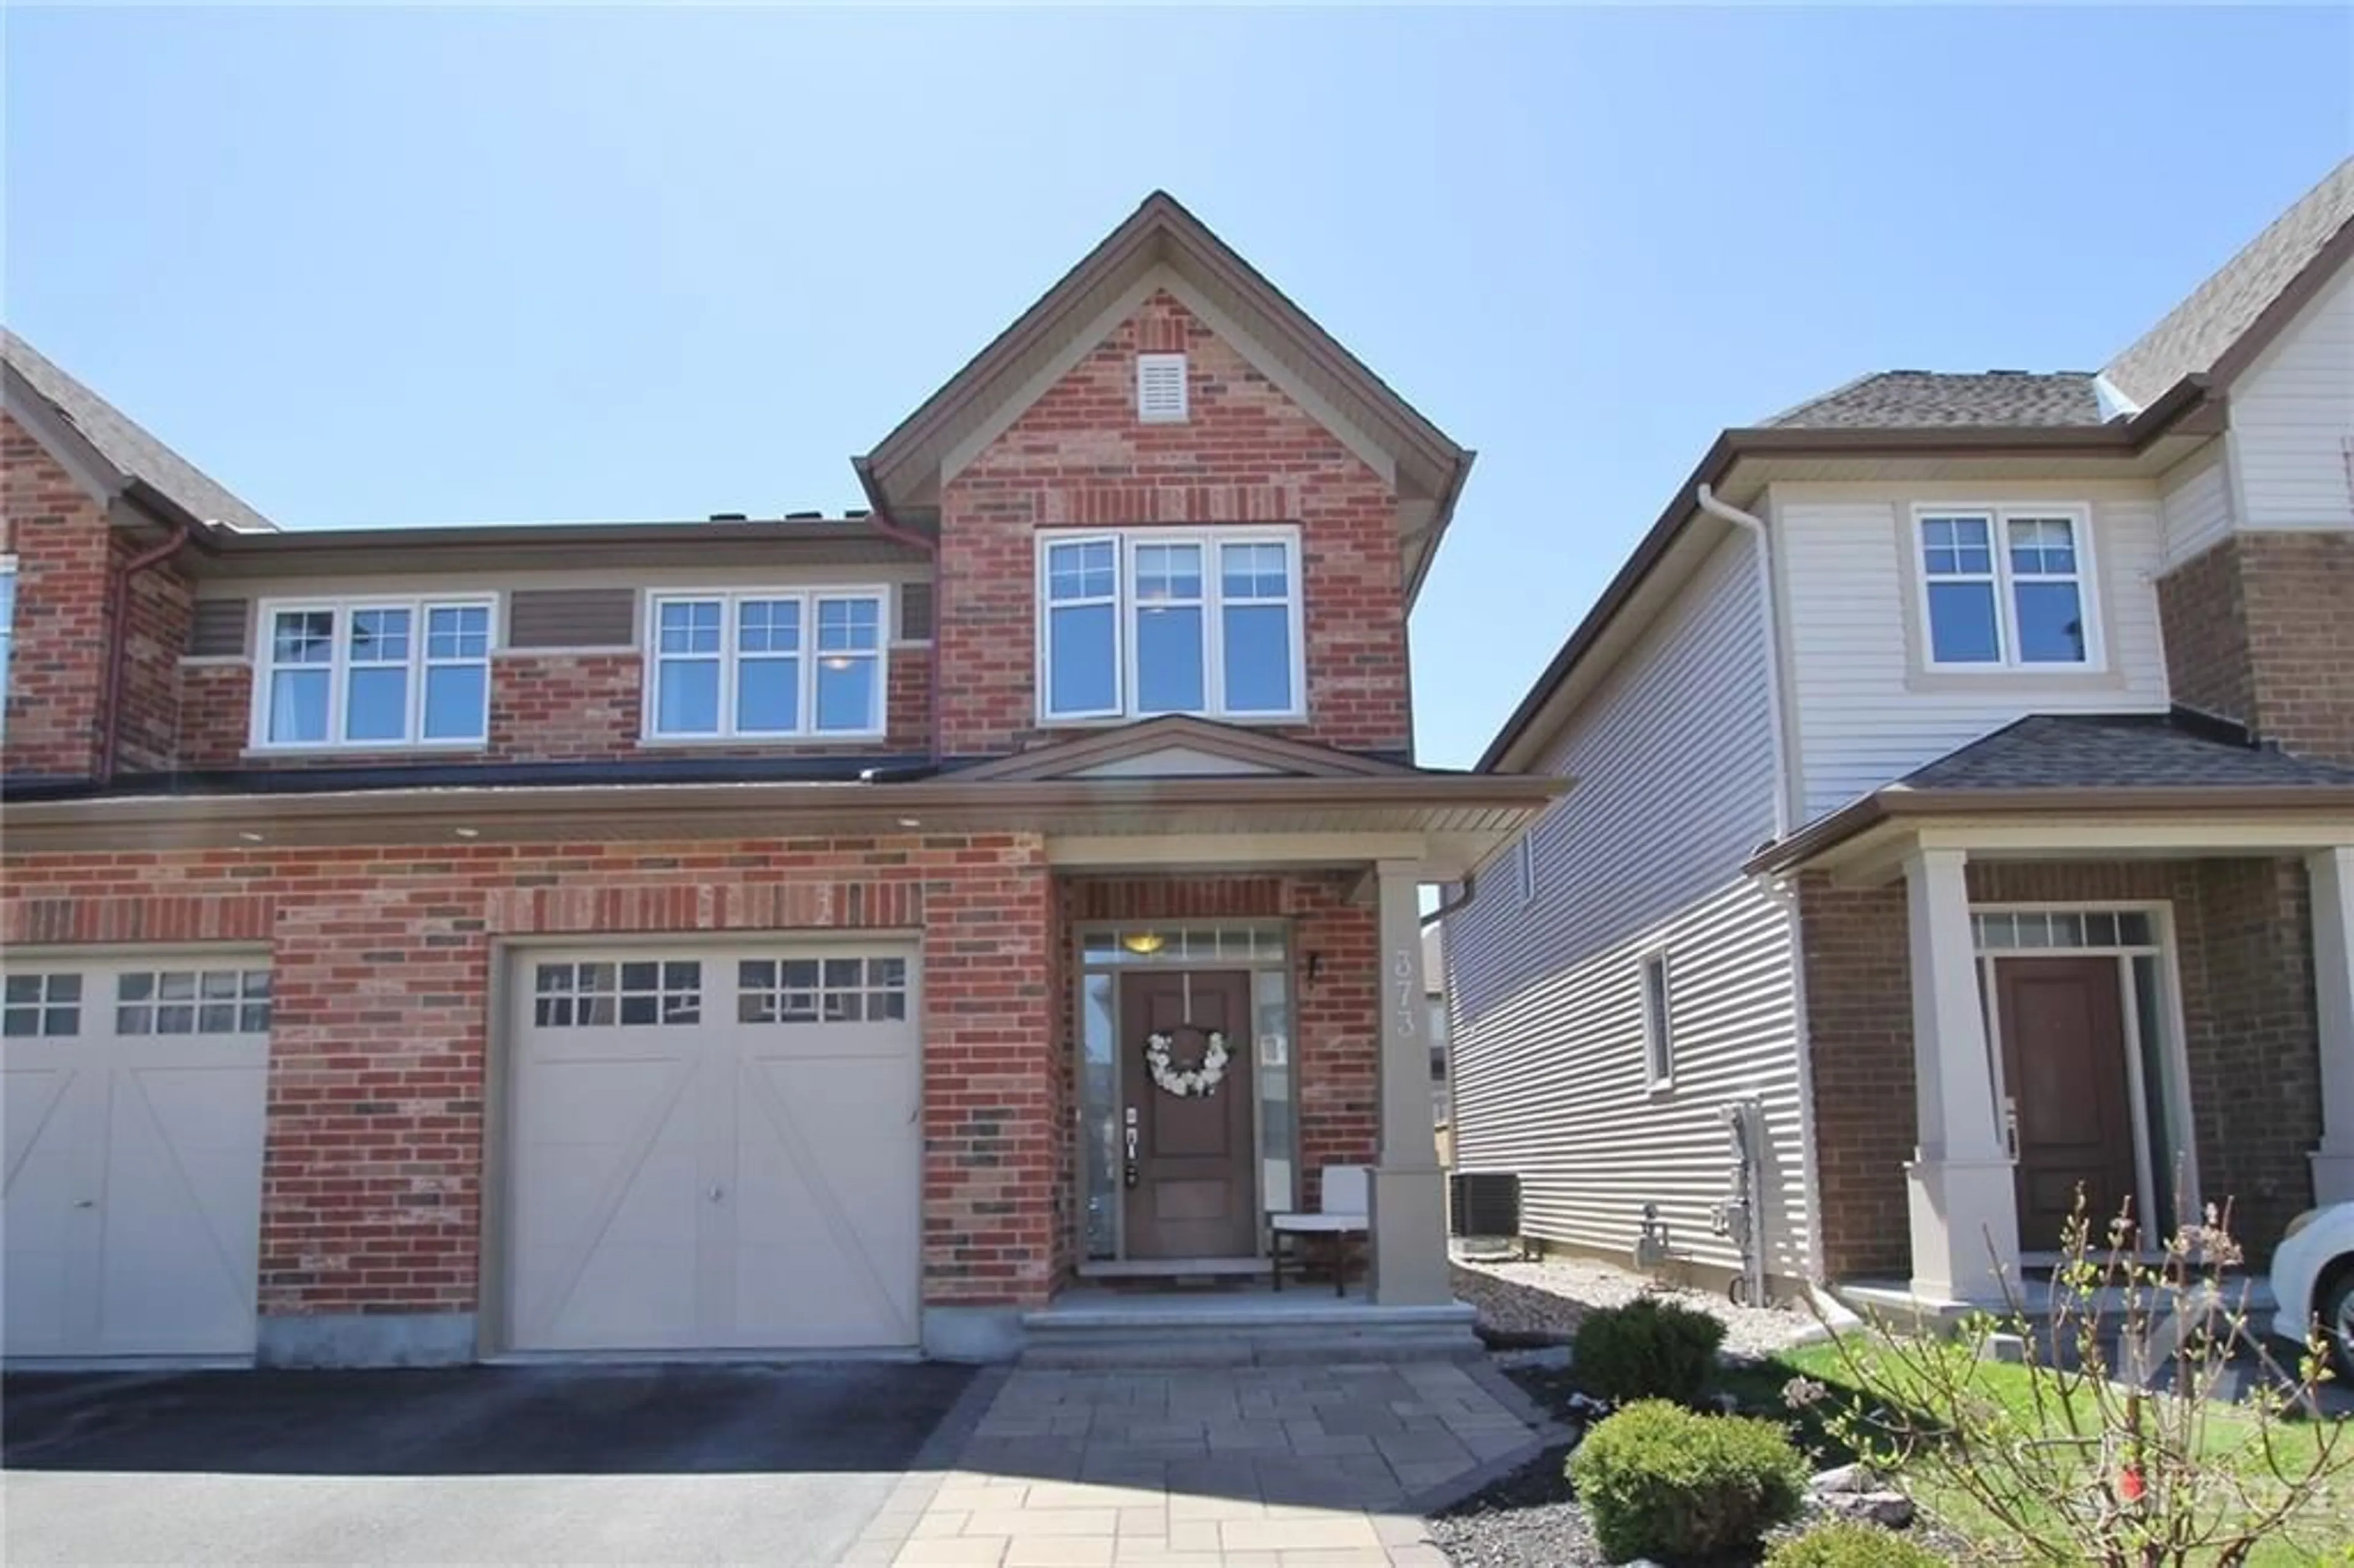 Home with brick exterior material for 373 WARMSTONE Dr, Ottawa Ontario K2S 0W5